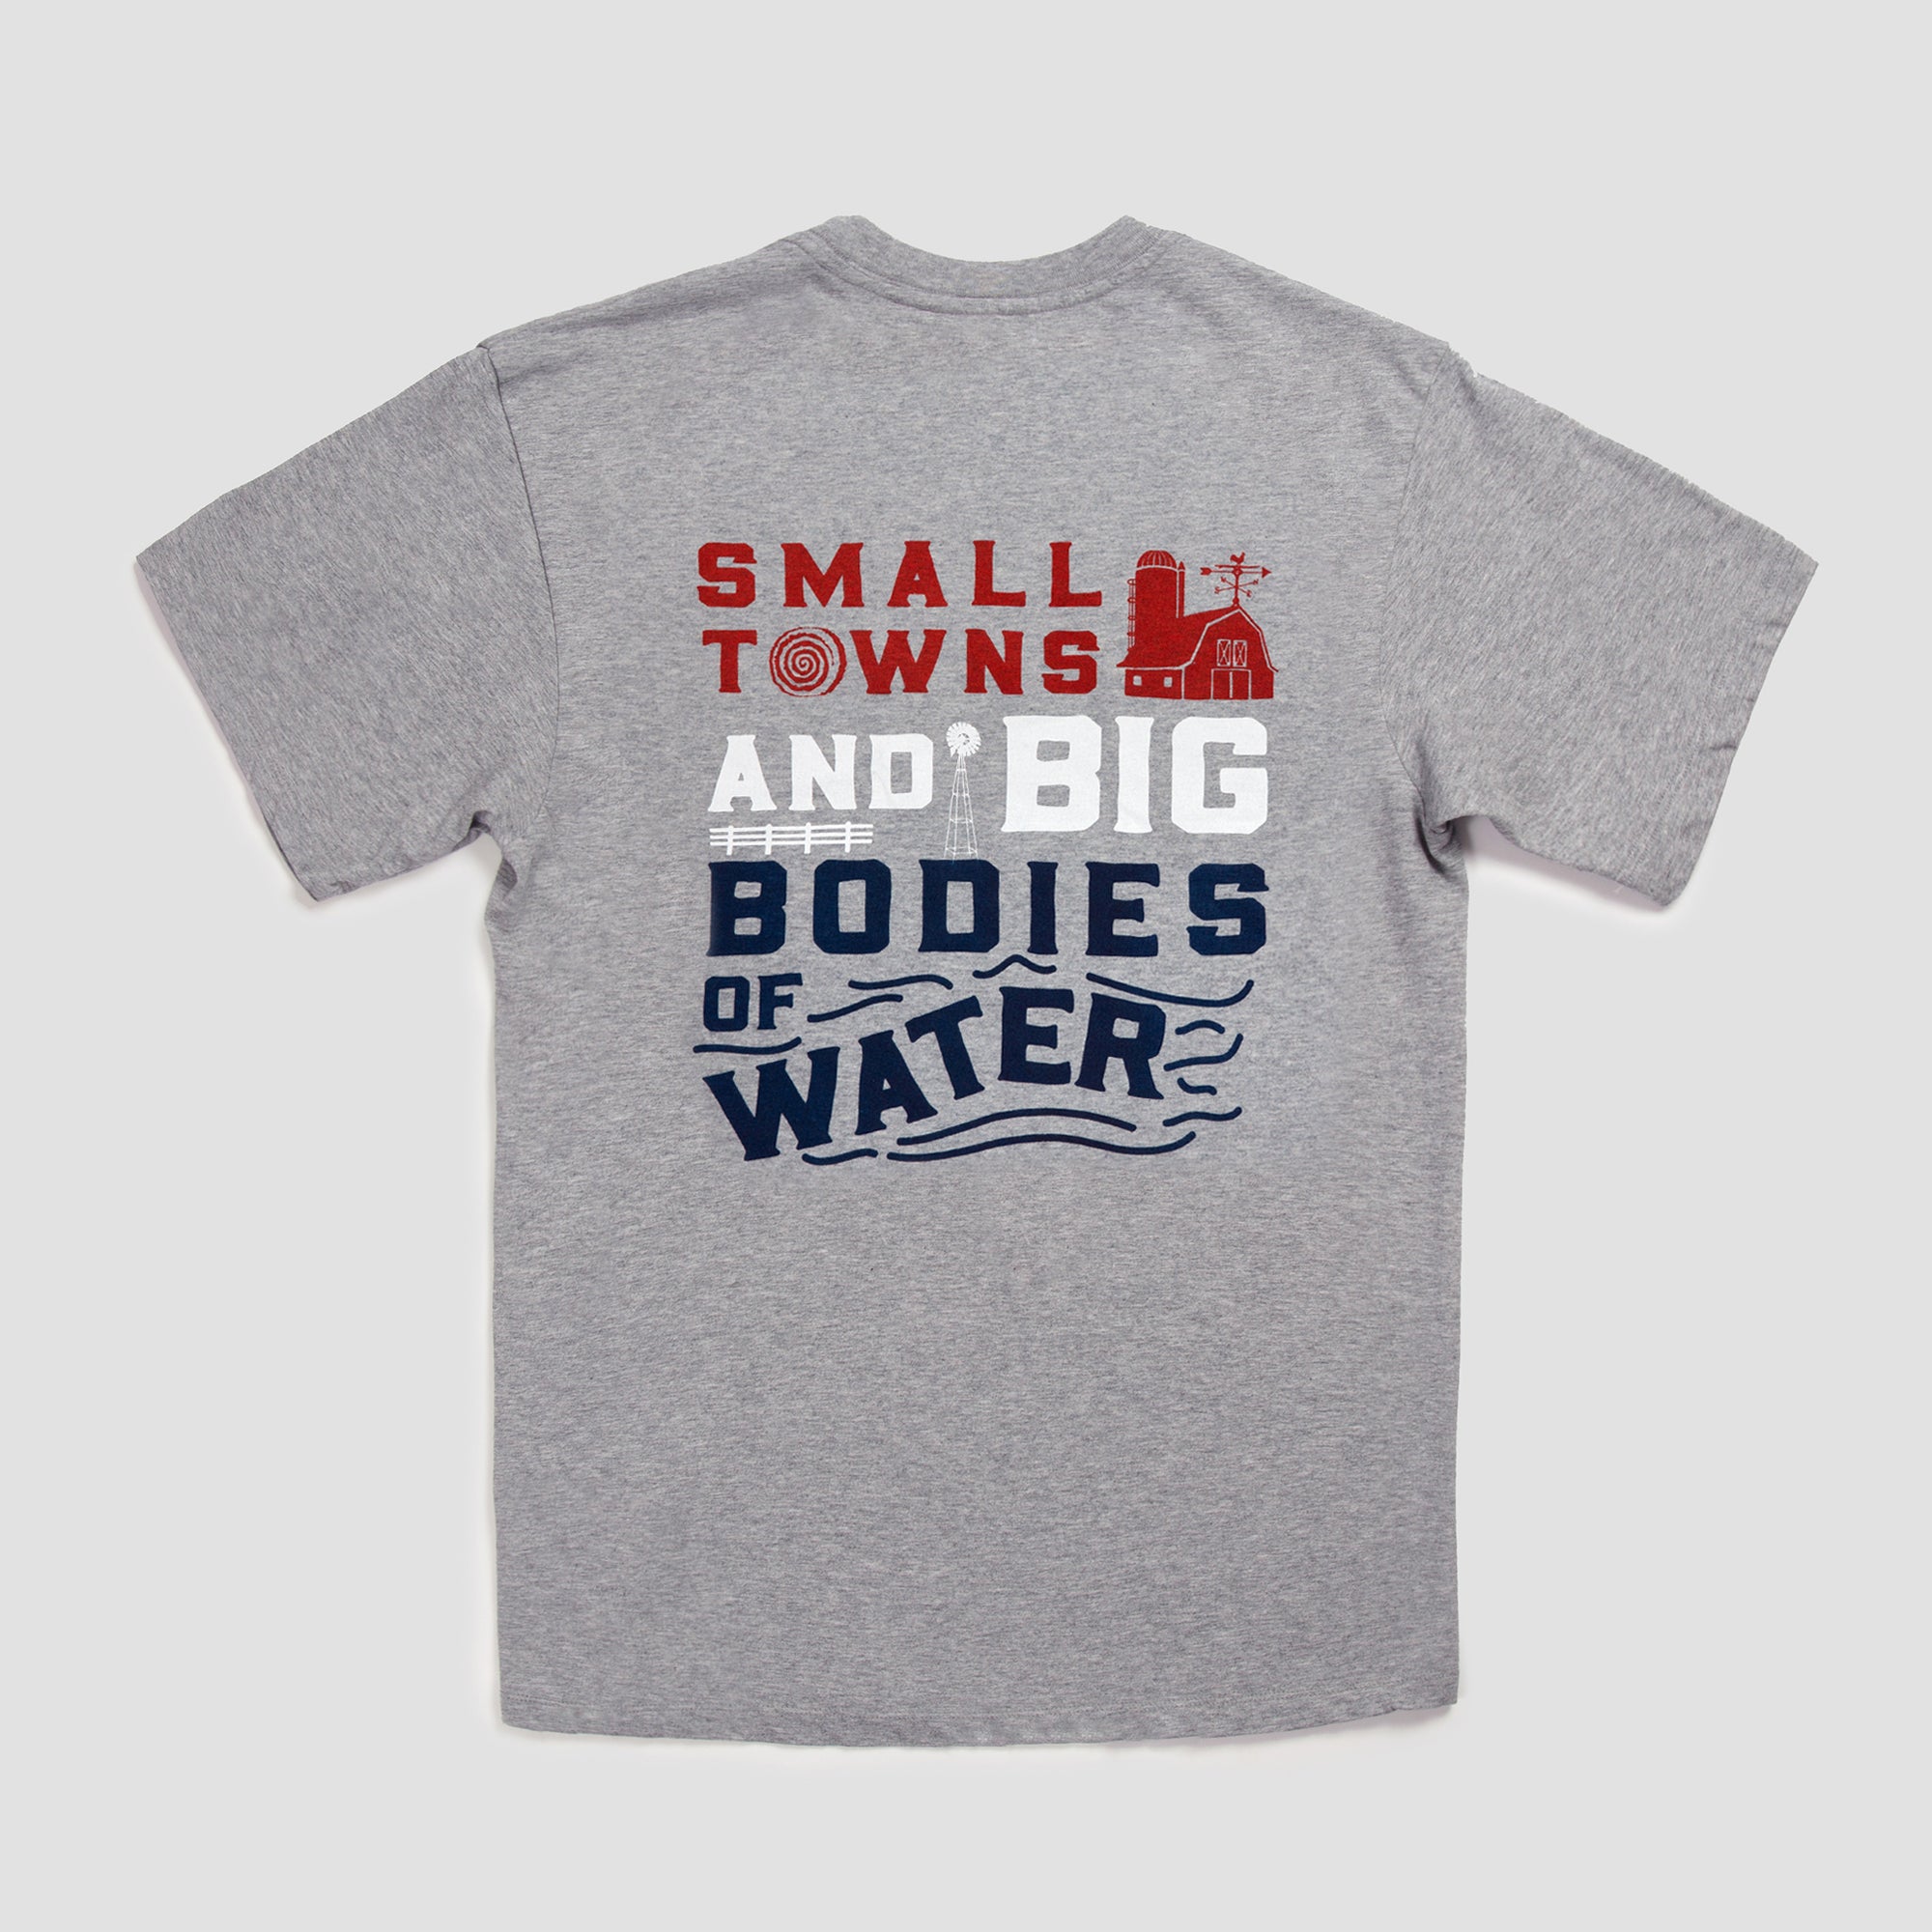 Small Towns & Big Bodies of Water Tee Shirt